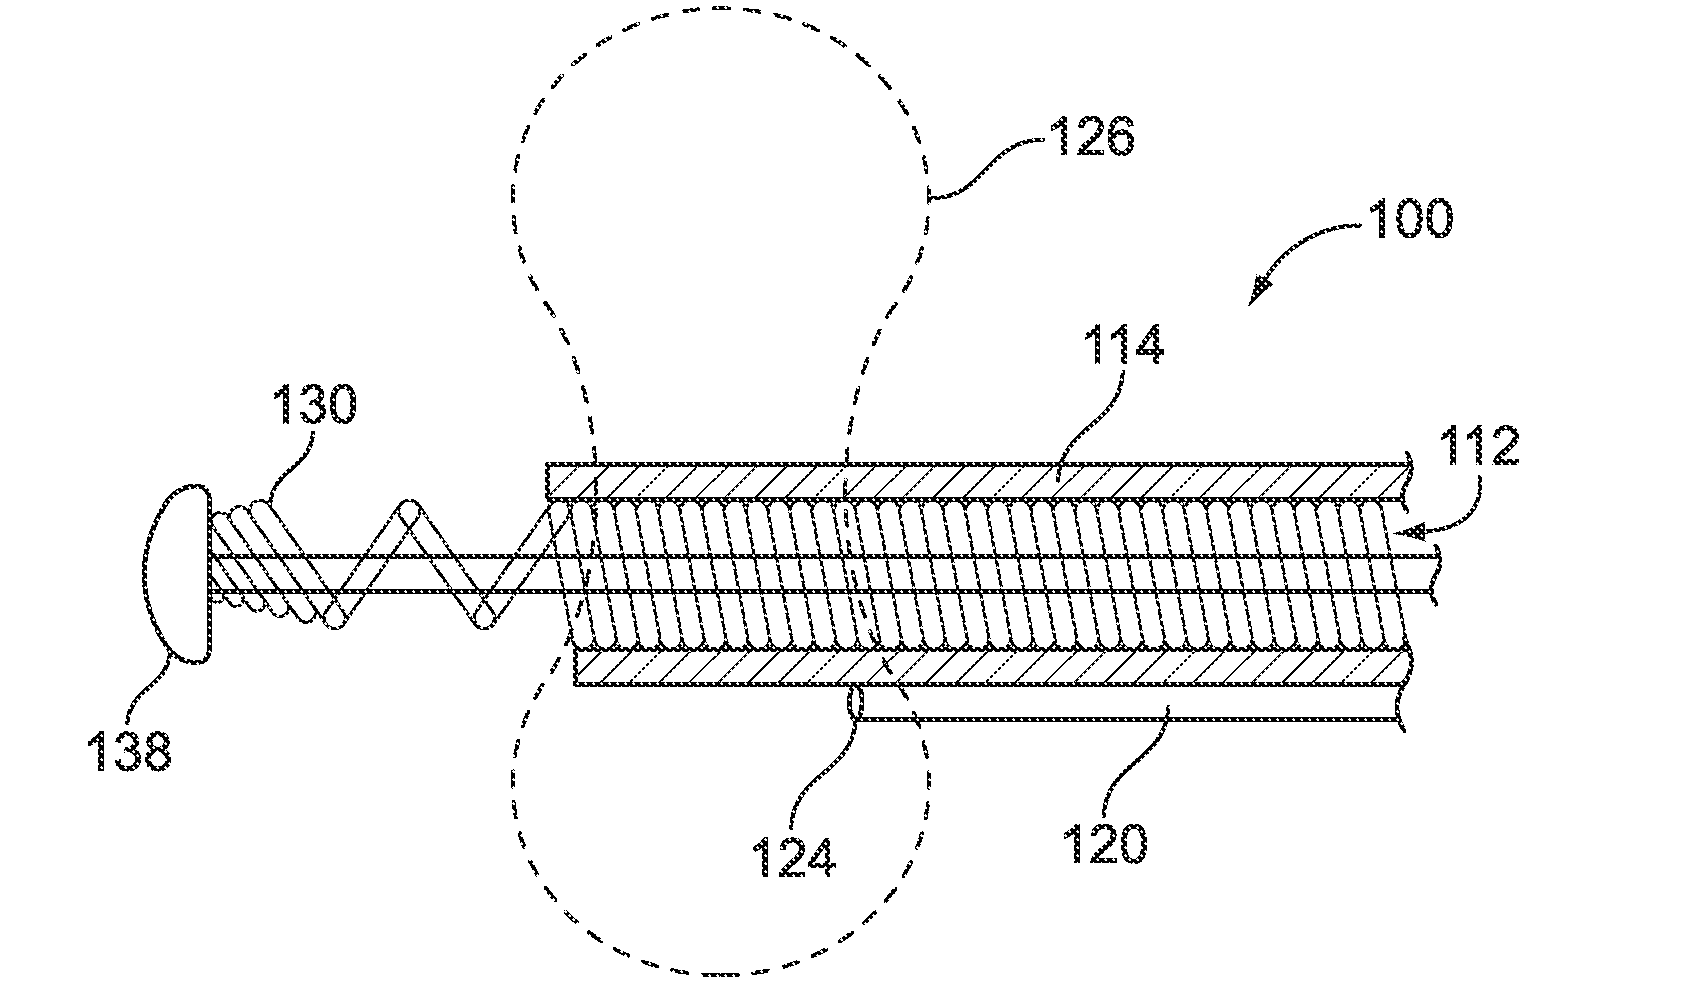 Instrument for continuous discharge of anesthetic drug